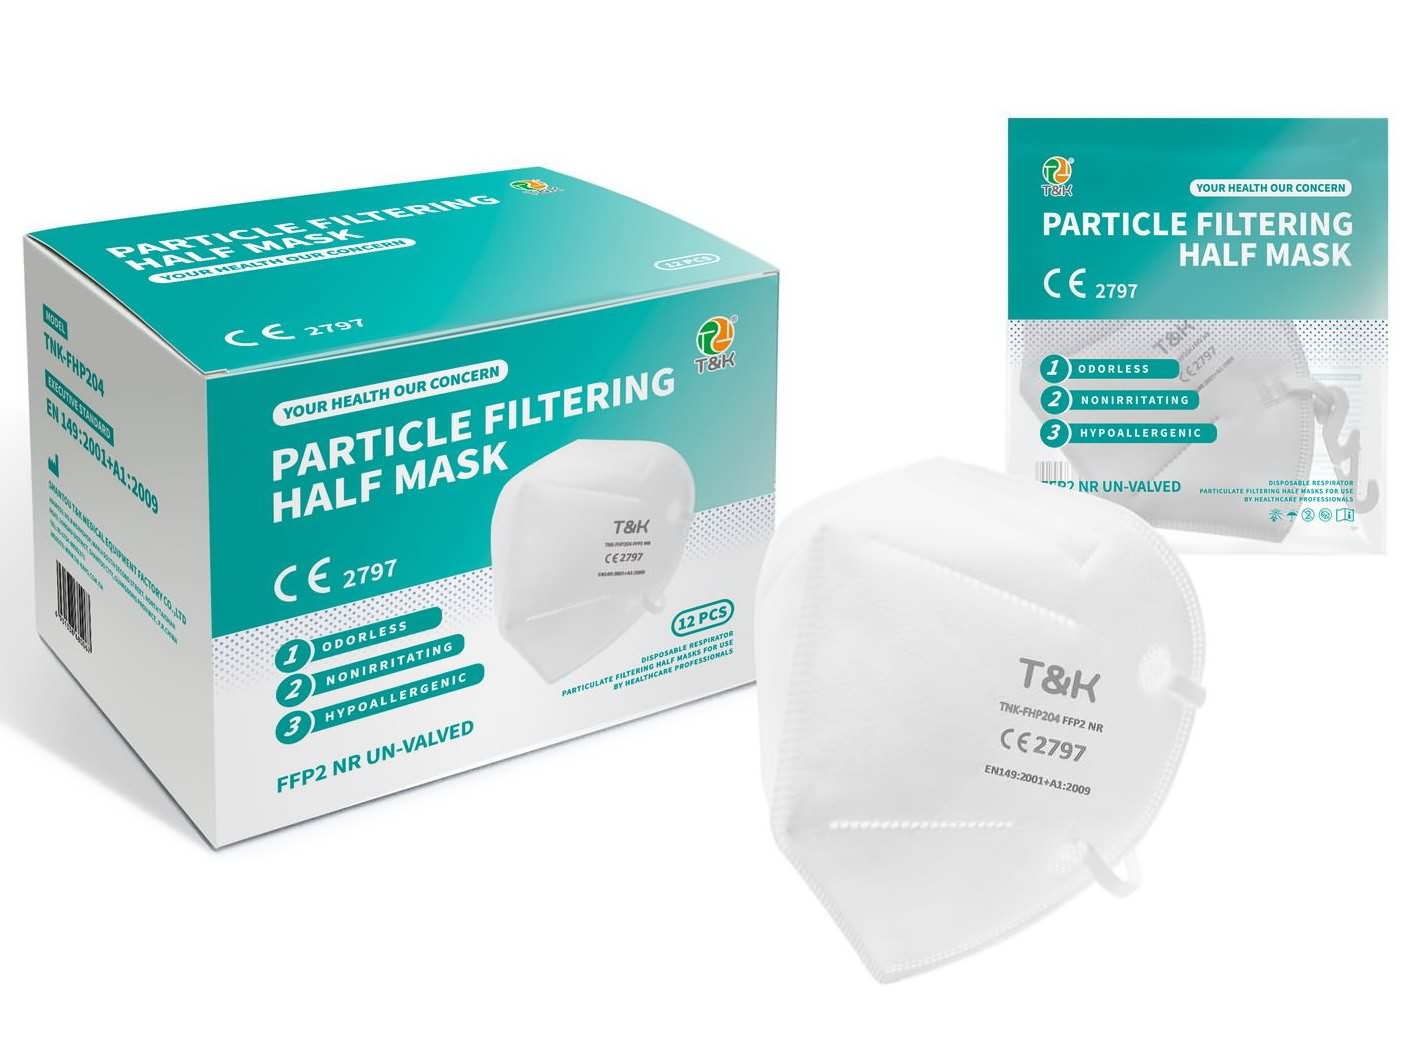 Are industrial dust masks disposable? Can dust masks prevent bacteria? - famous FFP2/KN95 mask company